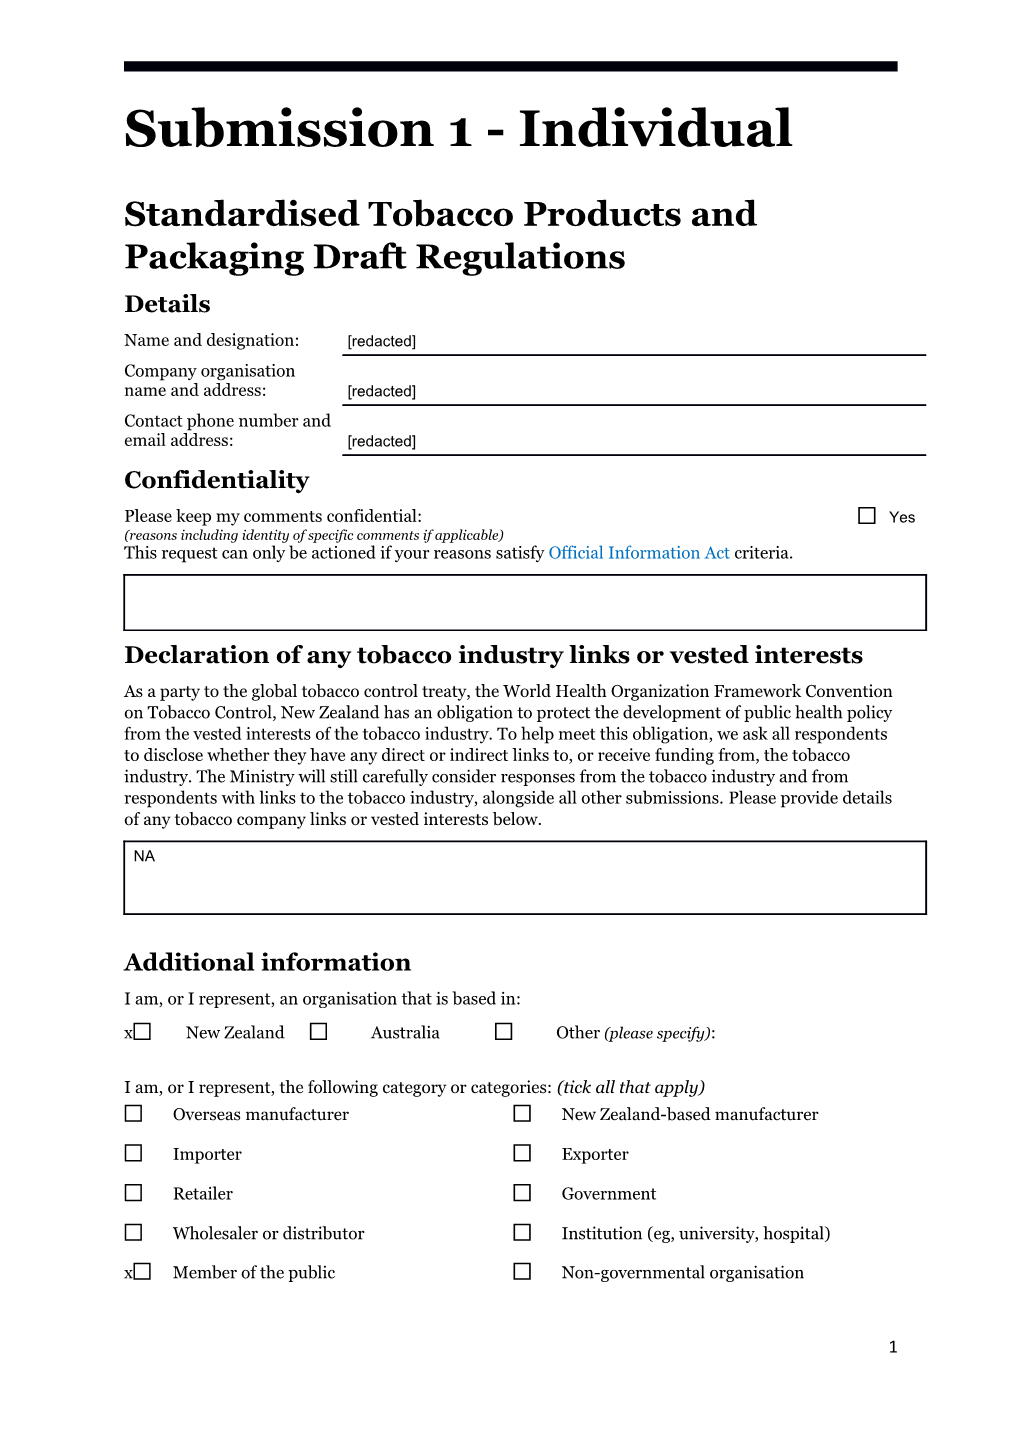 Standardised Tobacco Products and Packaging Draft Regulations - Submissions 1-10